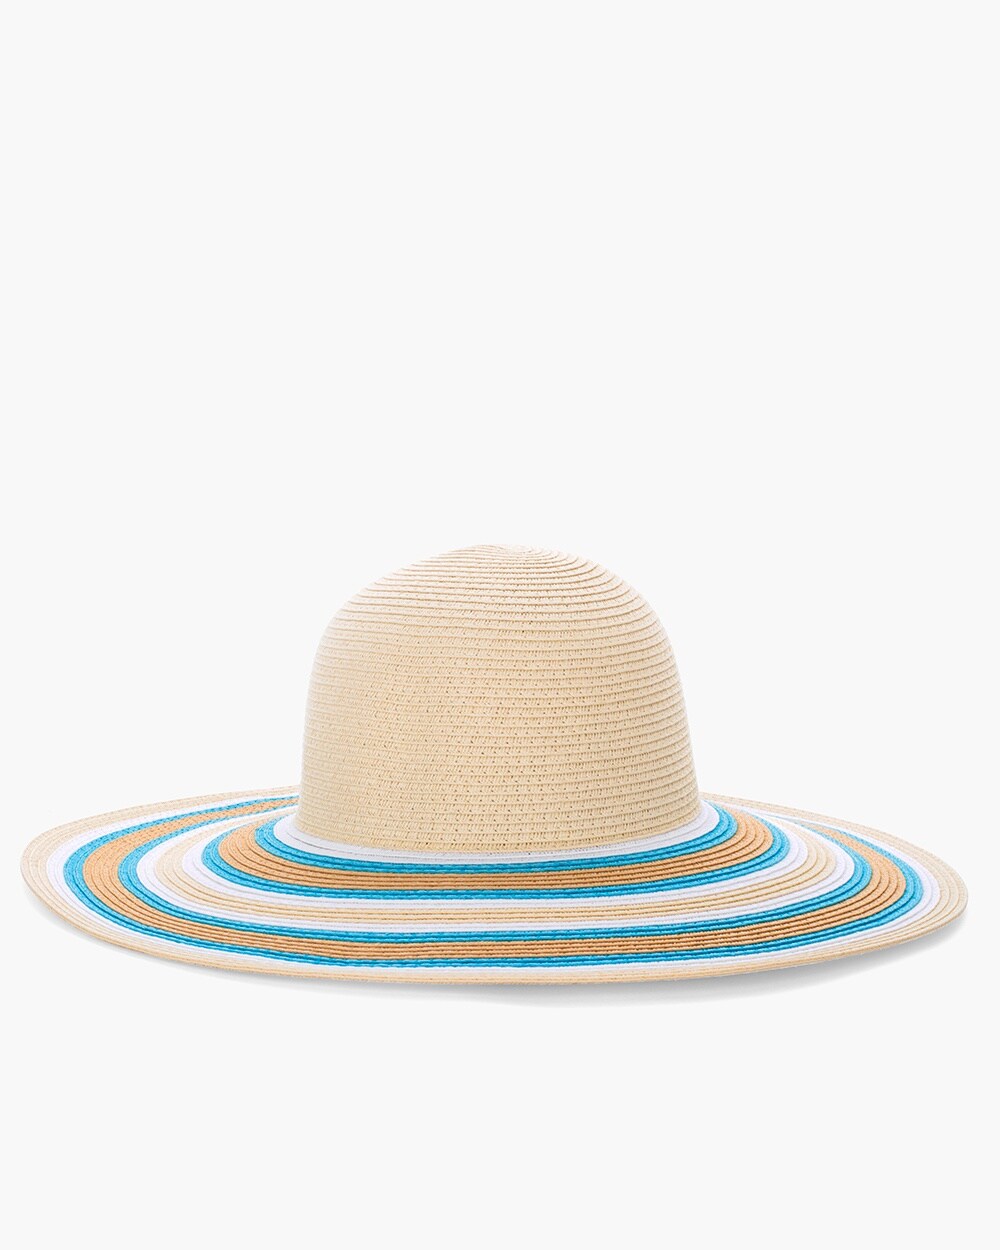 Blue and Neutral Striped Sun Hat